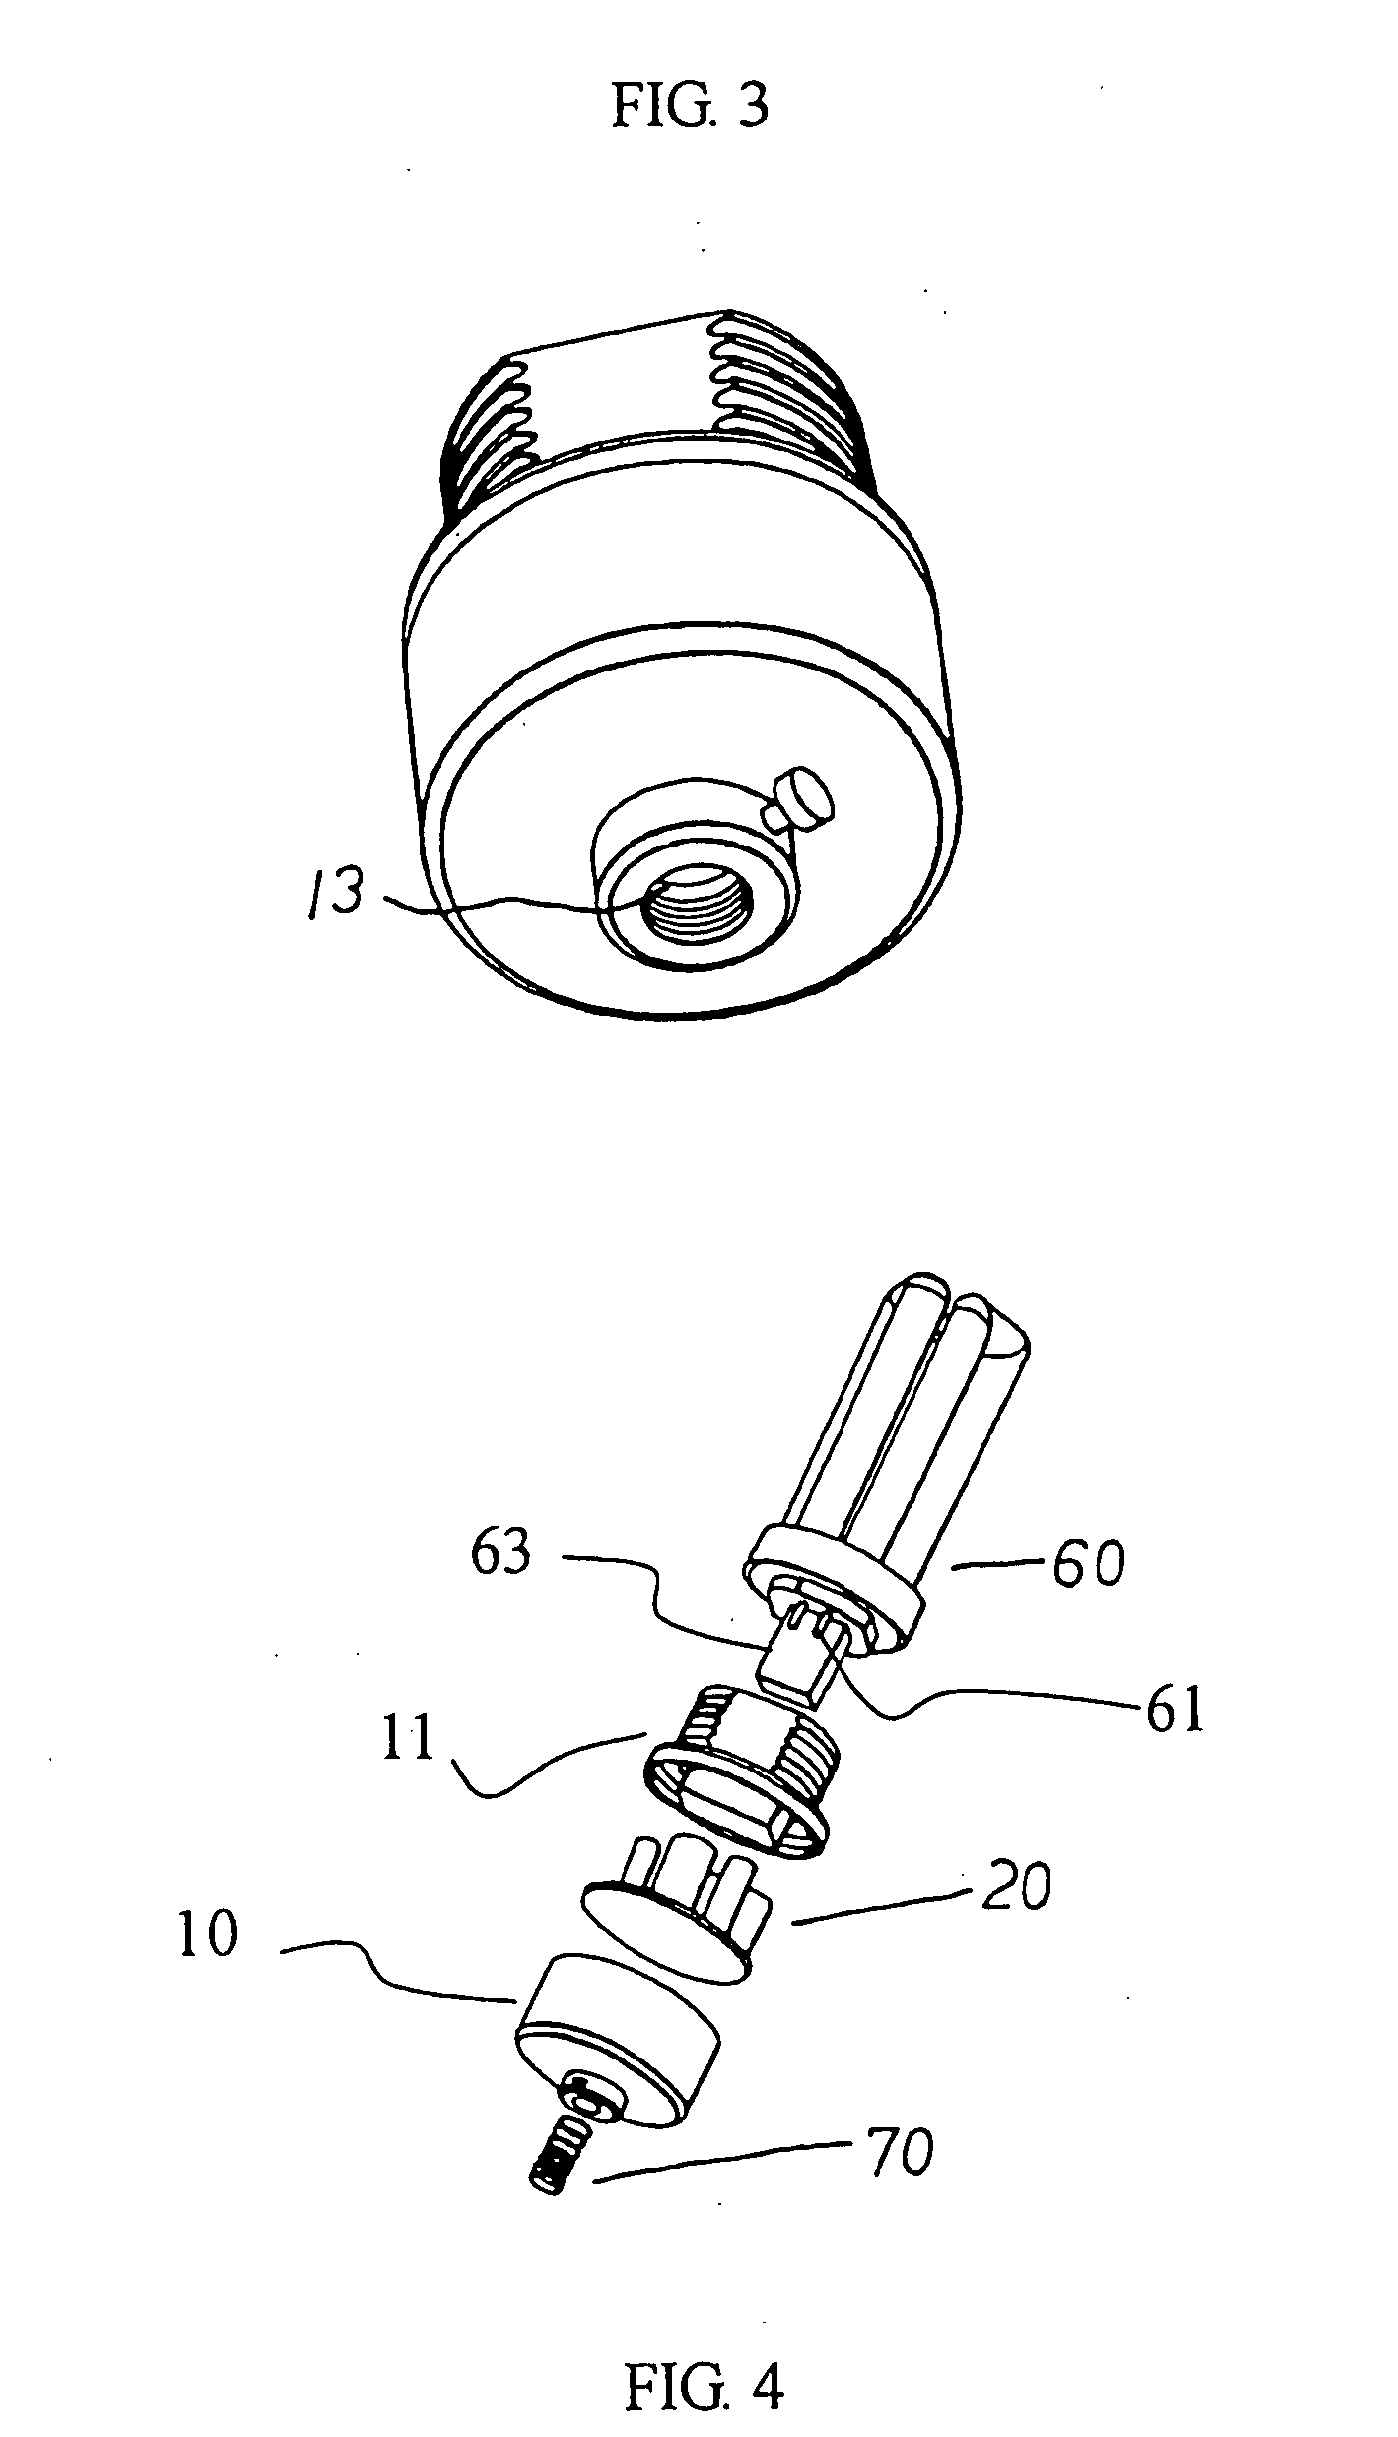 Lamp holder comprising lamp socket, ballast, and fastening mechanism, and lighting kit containing said lamp holder